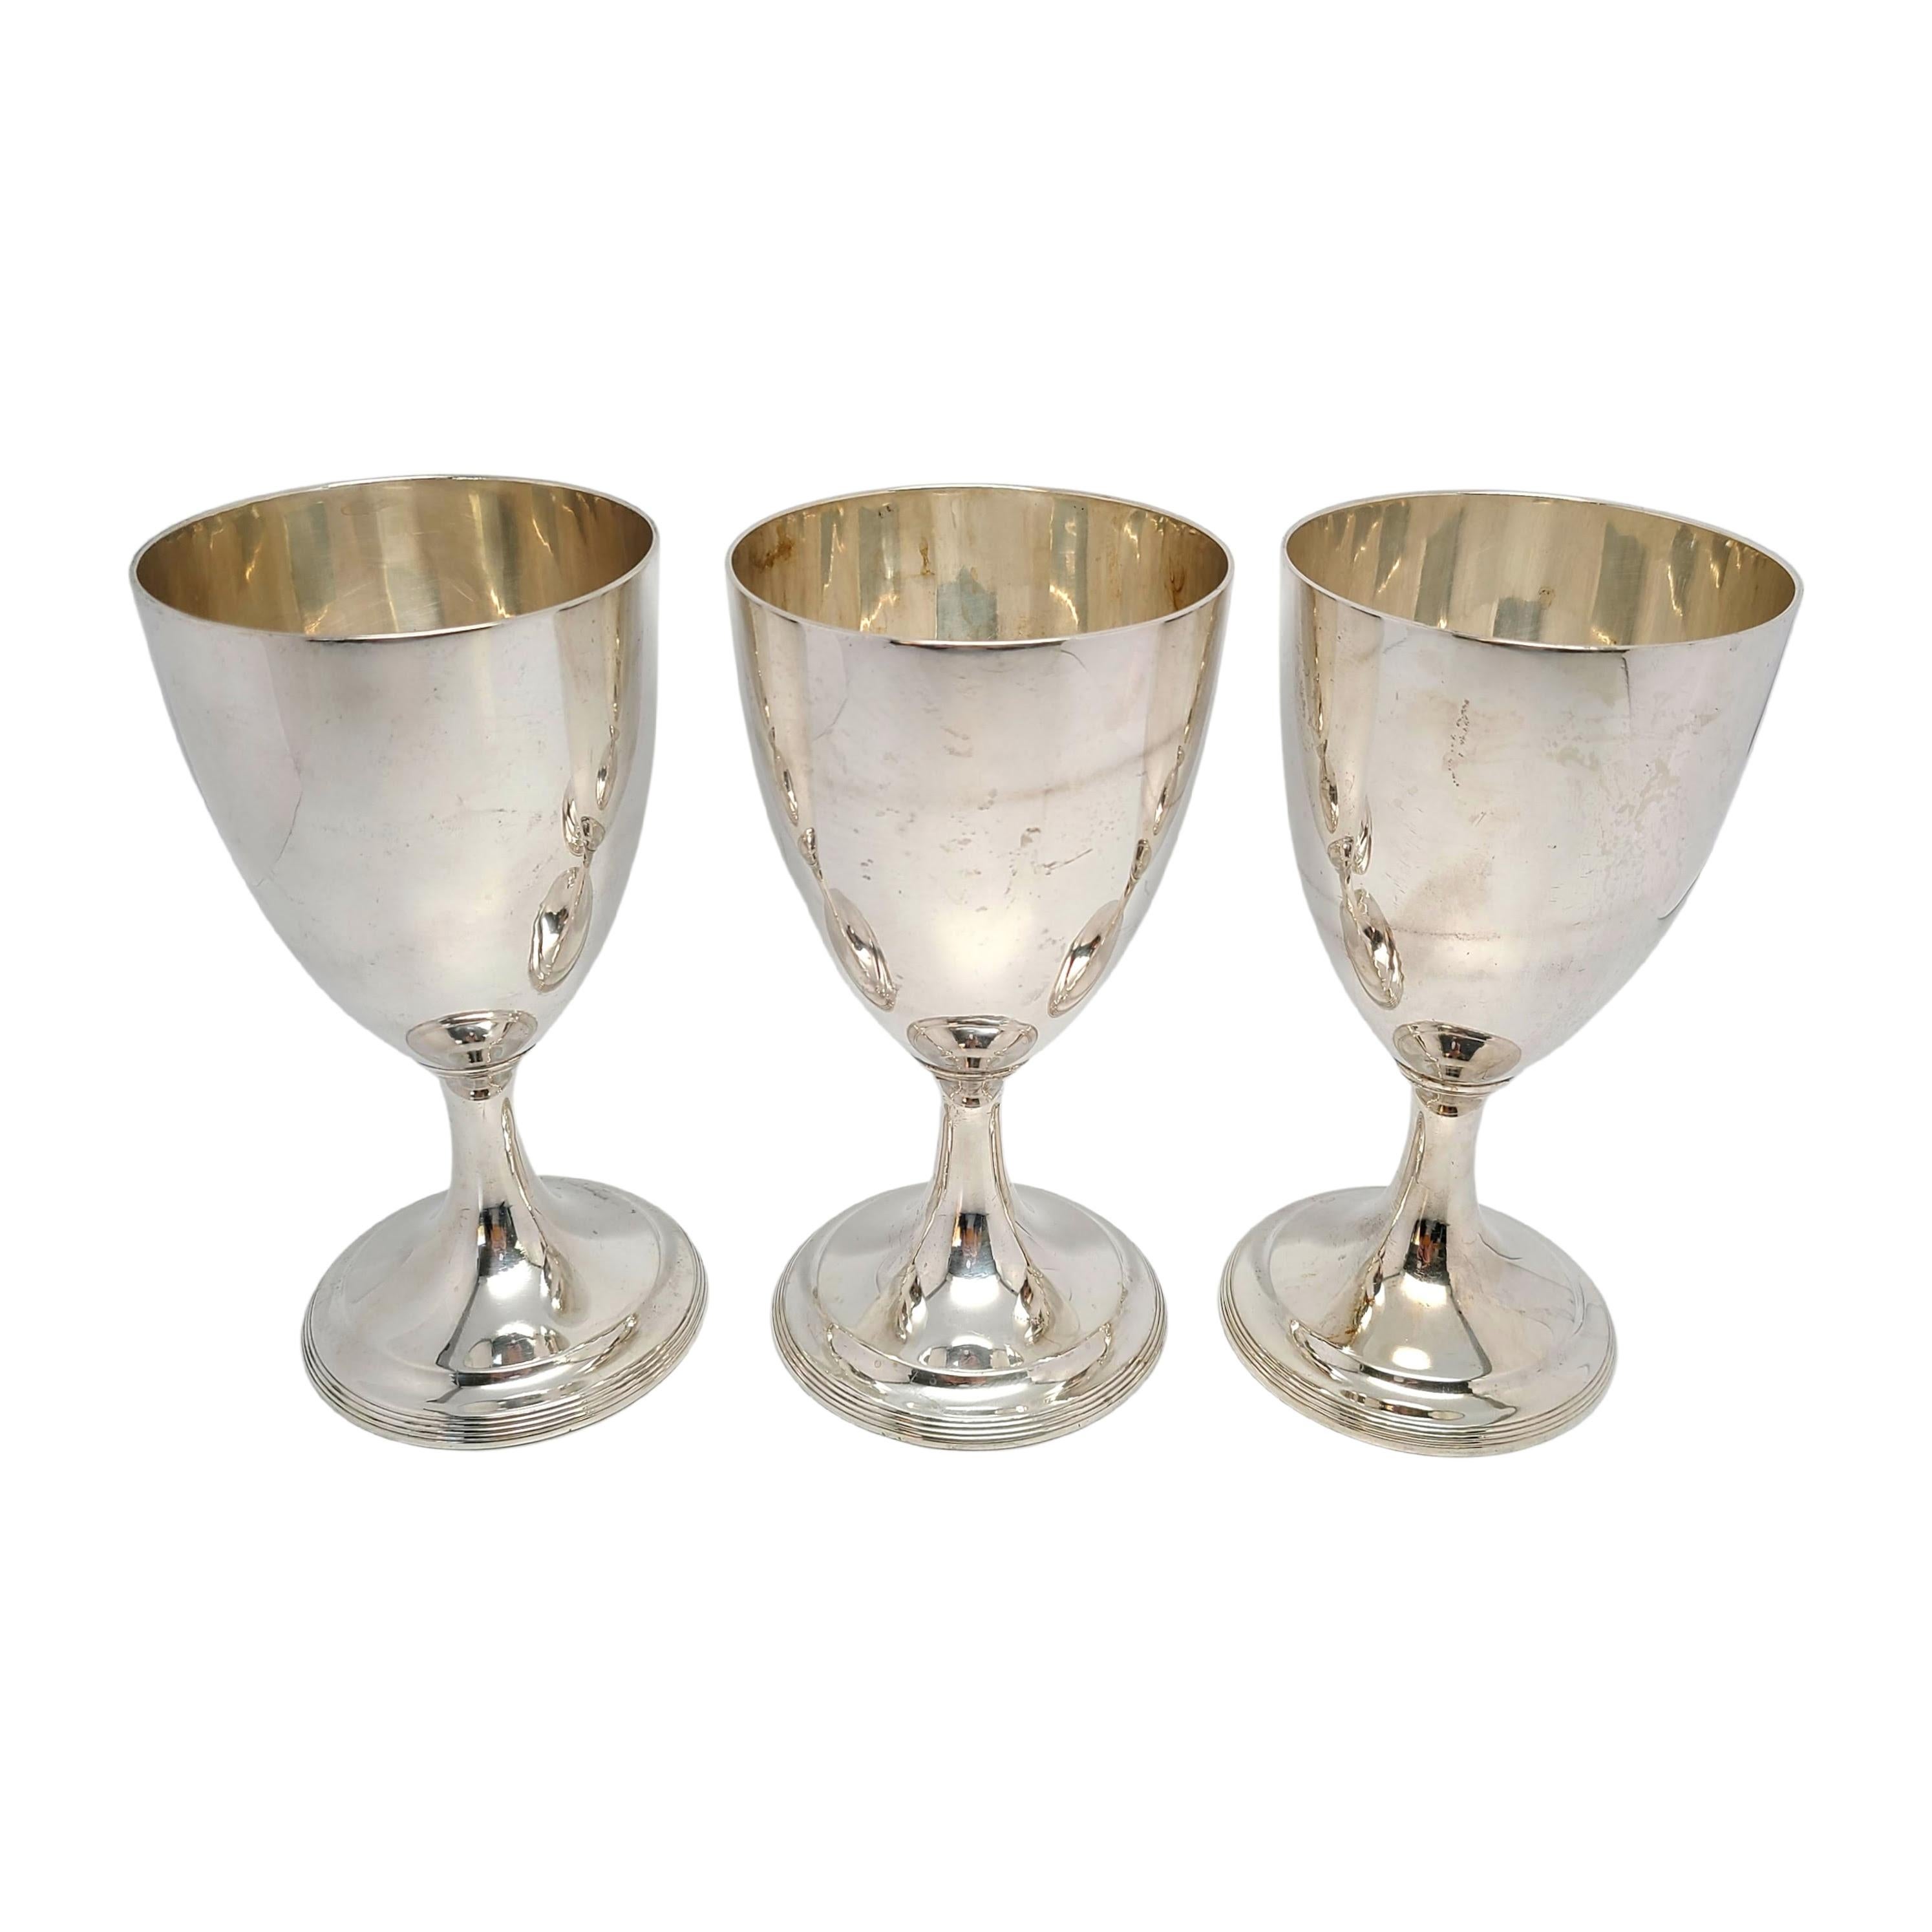 Set of 3 antique Tiffany & Co sterling silver Robert Salmon reproduction goblets, c.1913.

No monogram or engraving.

3 goblet style cups features an ovoid bowl with a a highly polished finish and ribbed edge foot. Hallmarks date this piece to